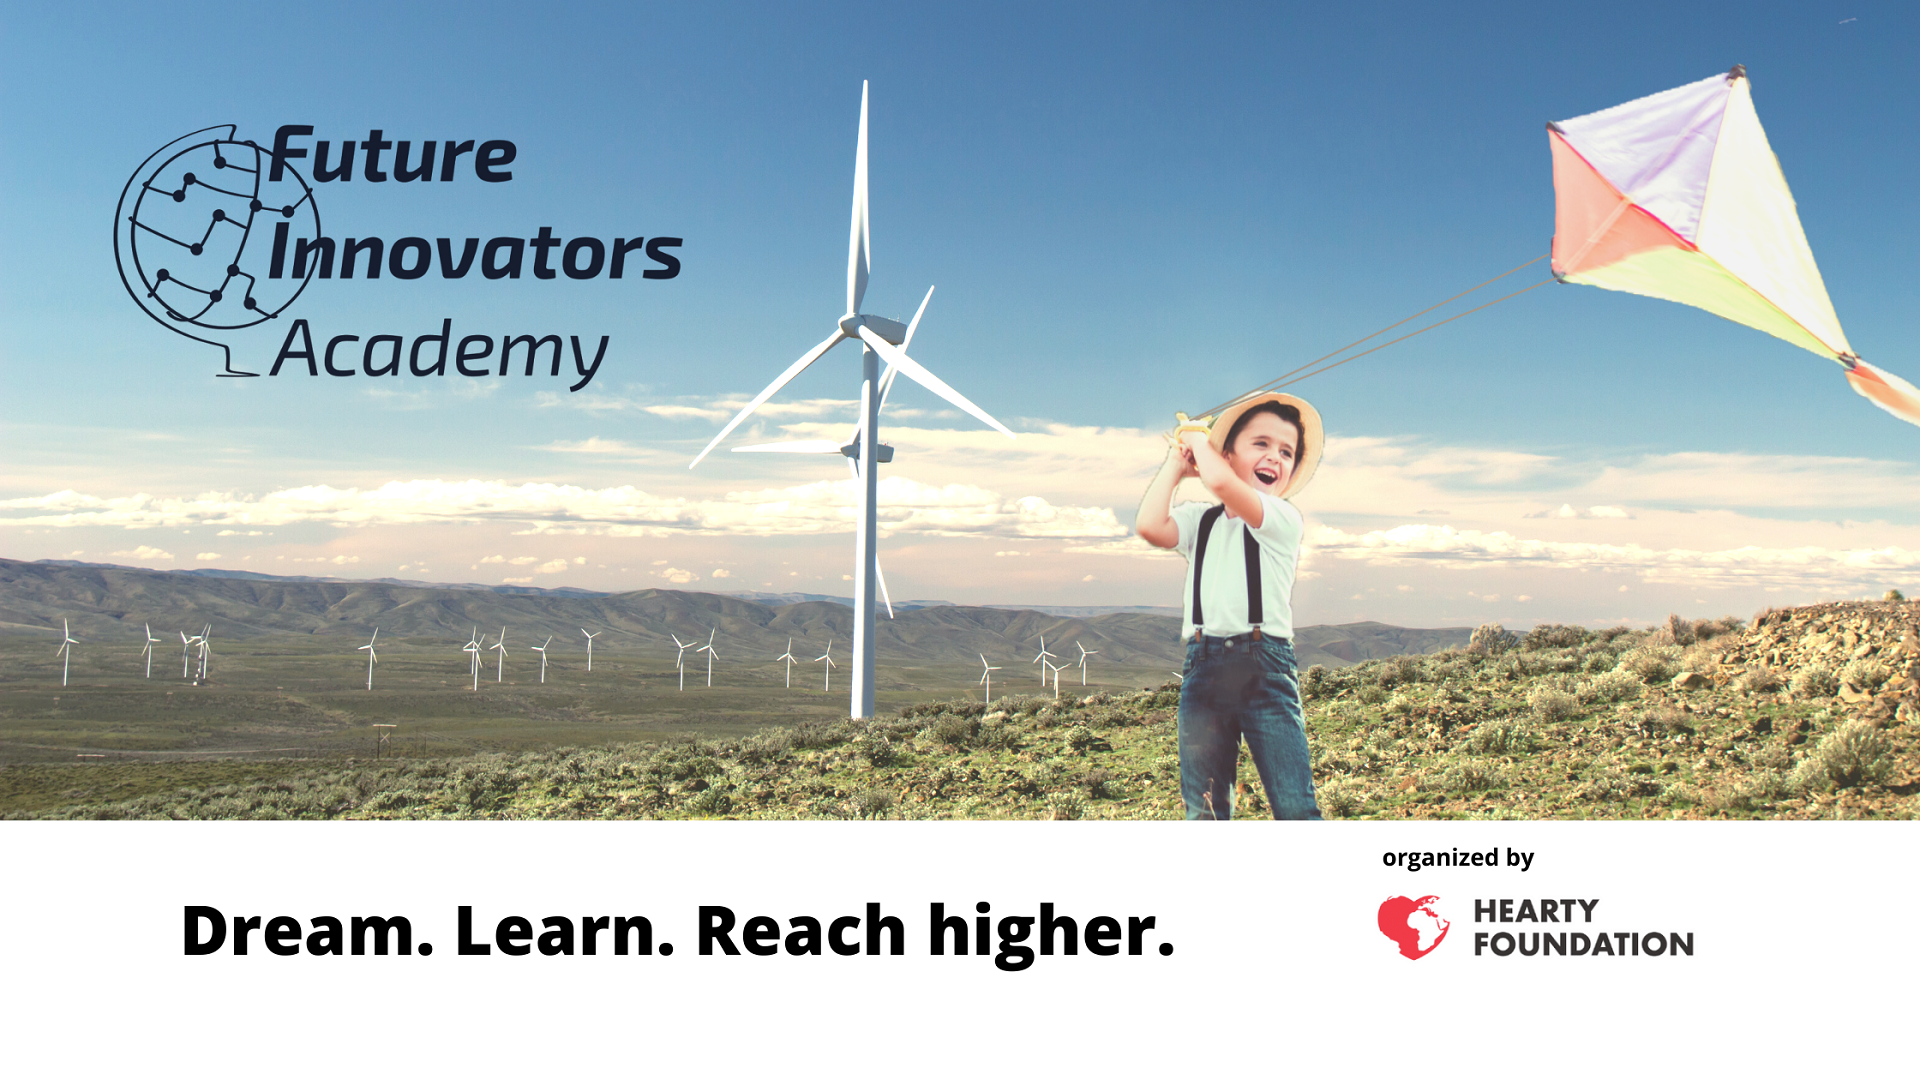 Future Innovators Academy. Dream. Leran. Reach higher. Organized by Hearty Foundation. Powered by UBS.